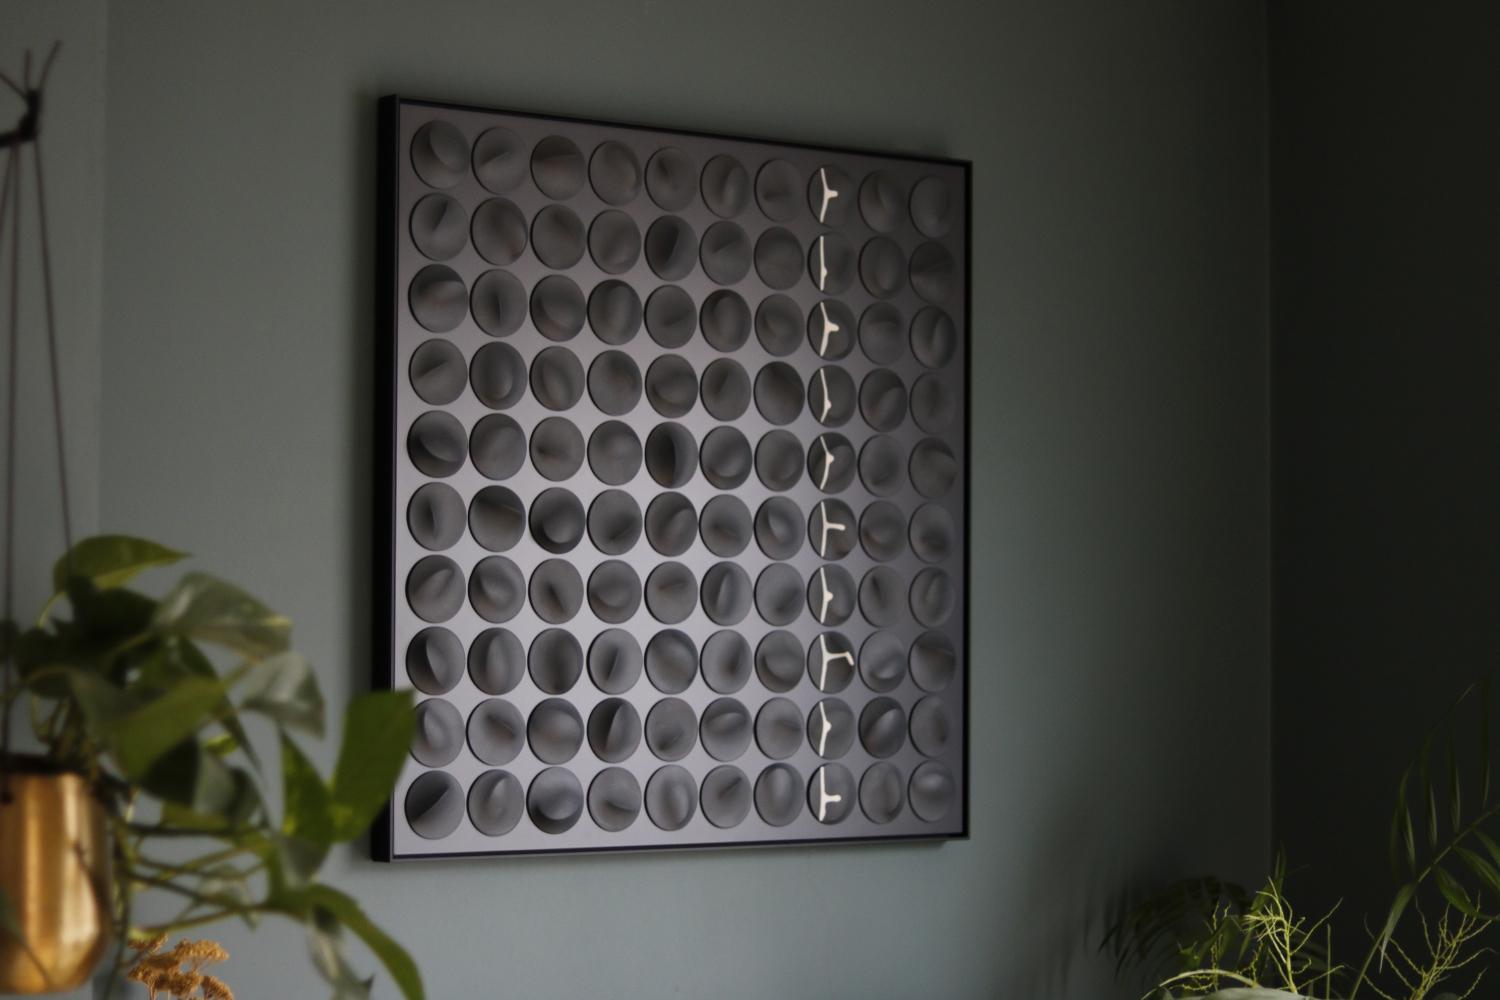 Porcelain Slip Cast Discs (black discs with white drip)
Mounted on Black Matte Aluminium
Black Aluminium Frame

David Burns creates ceramic and metal wall art characterised by the elegance of porcelain clay and the forms and craftsmanship of slip